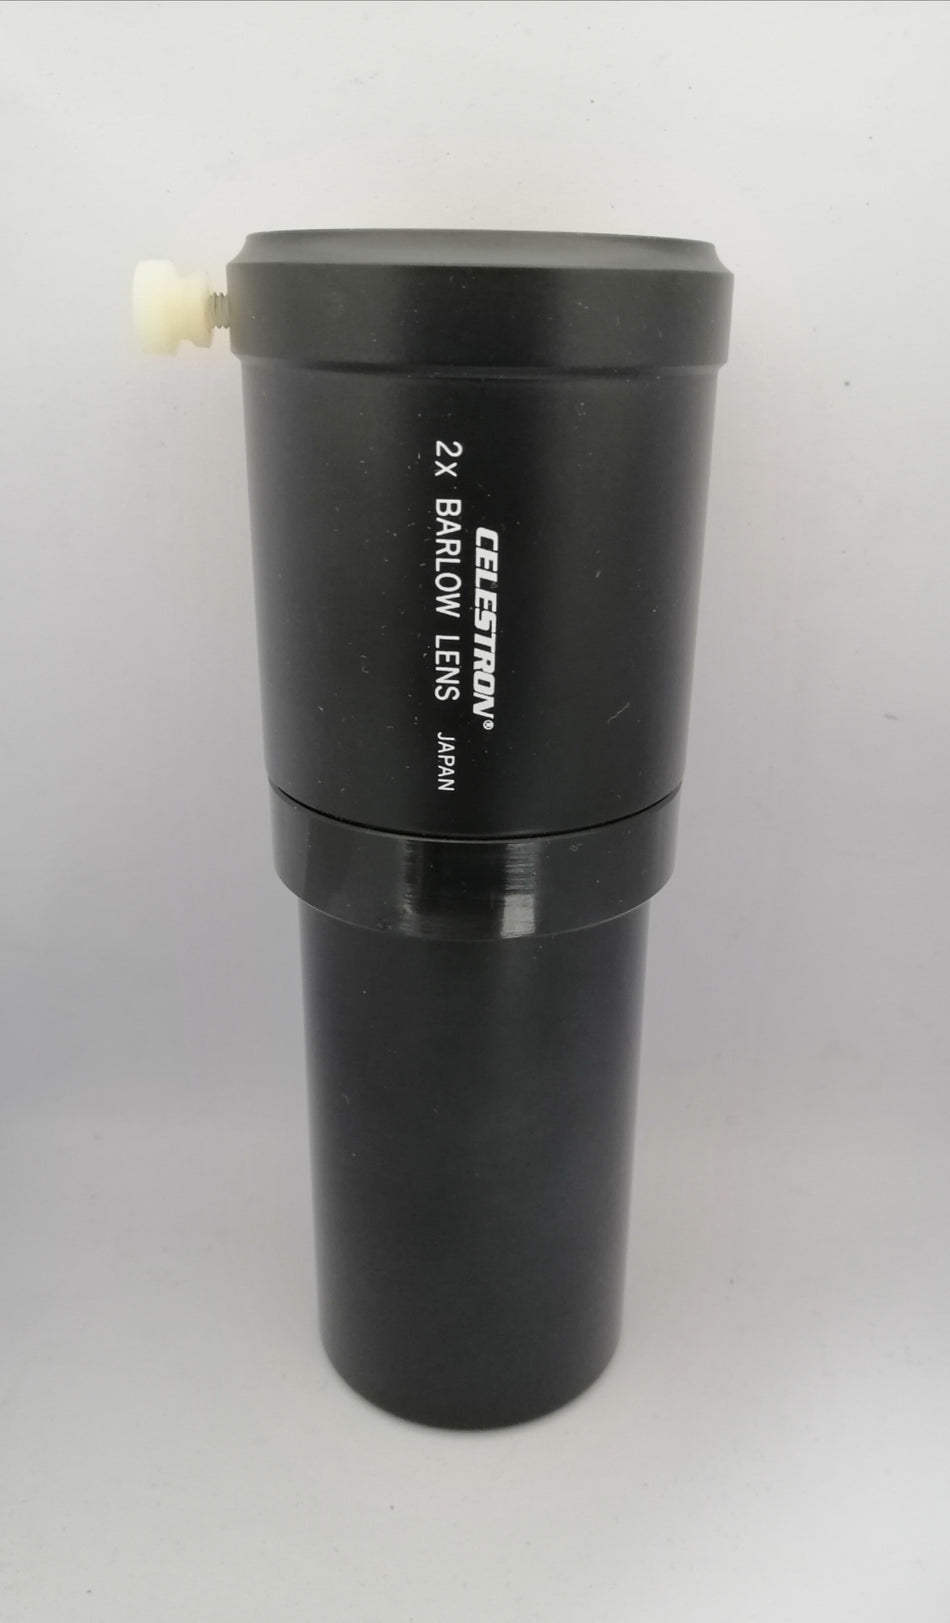 Celestron 2x Barlow 2" - Made in Japan! (Pre-owned)